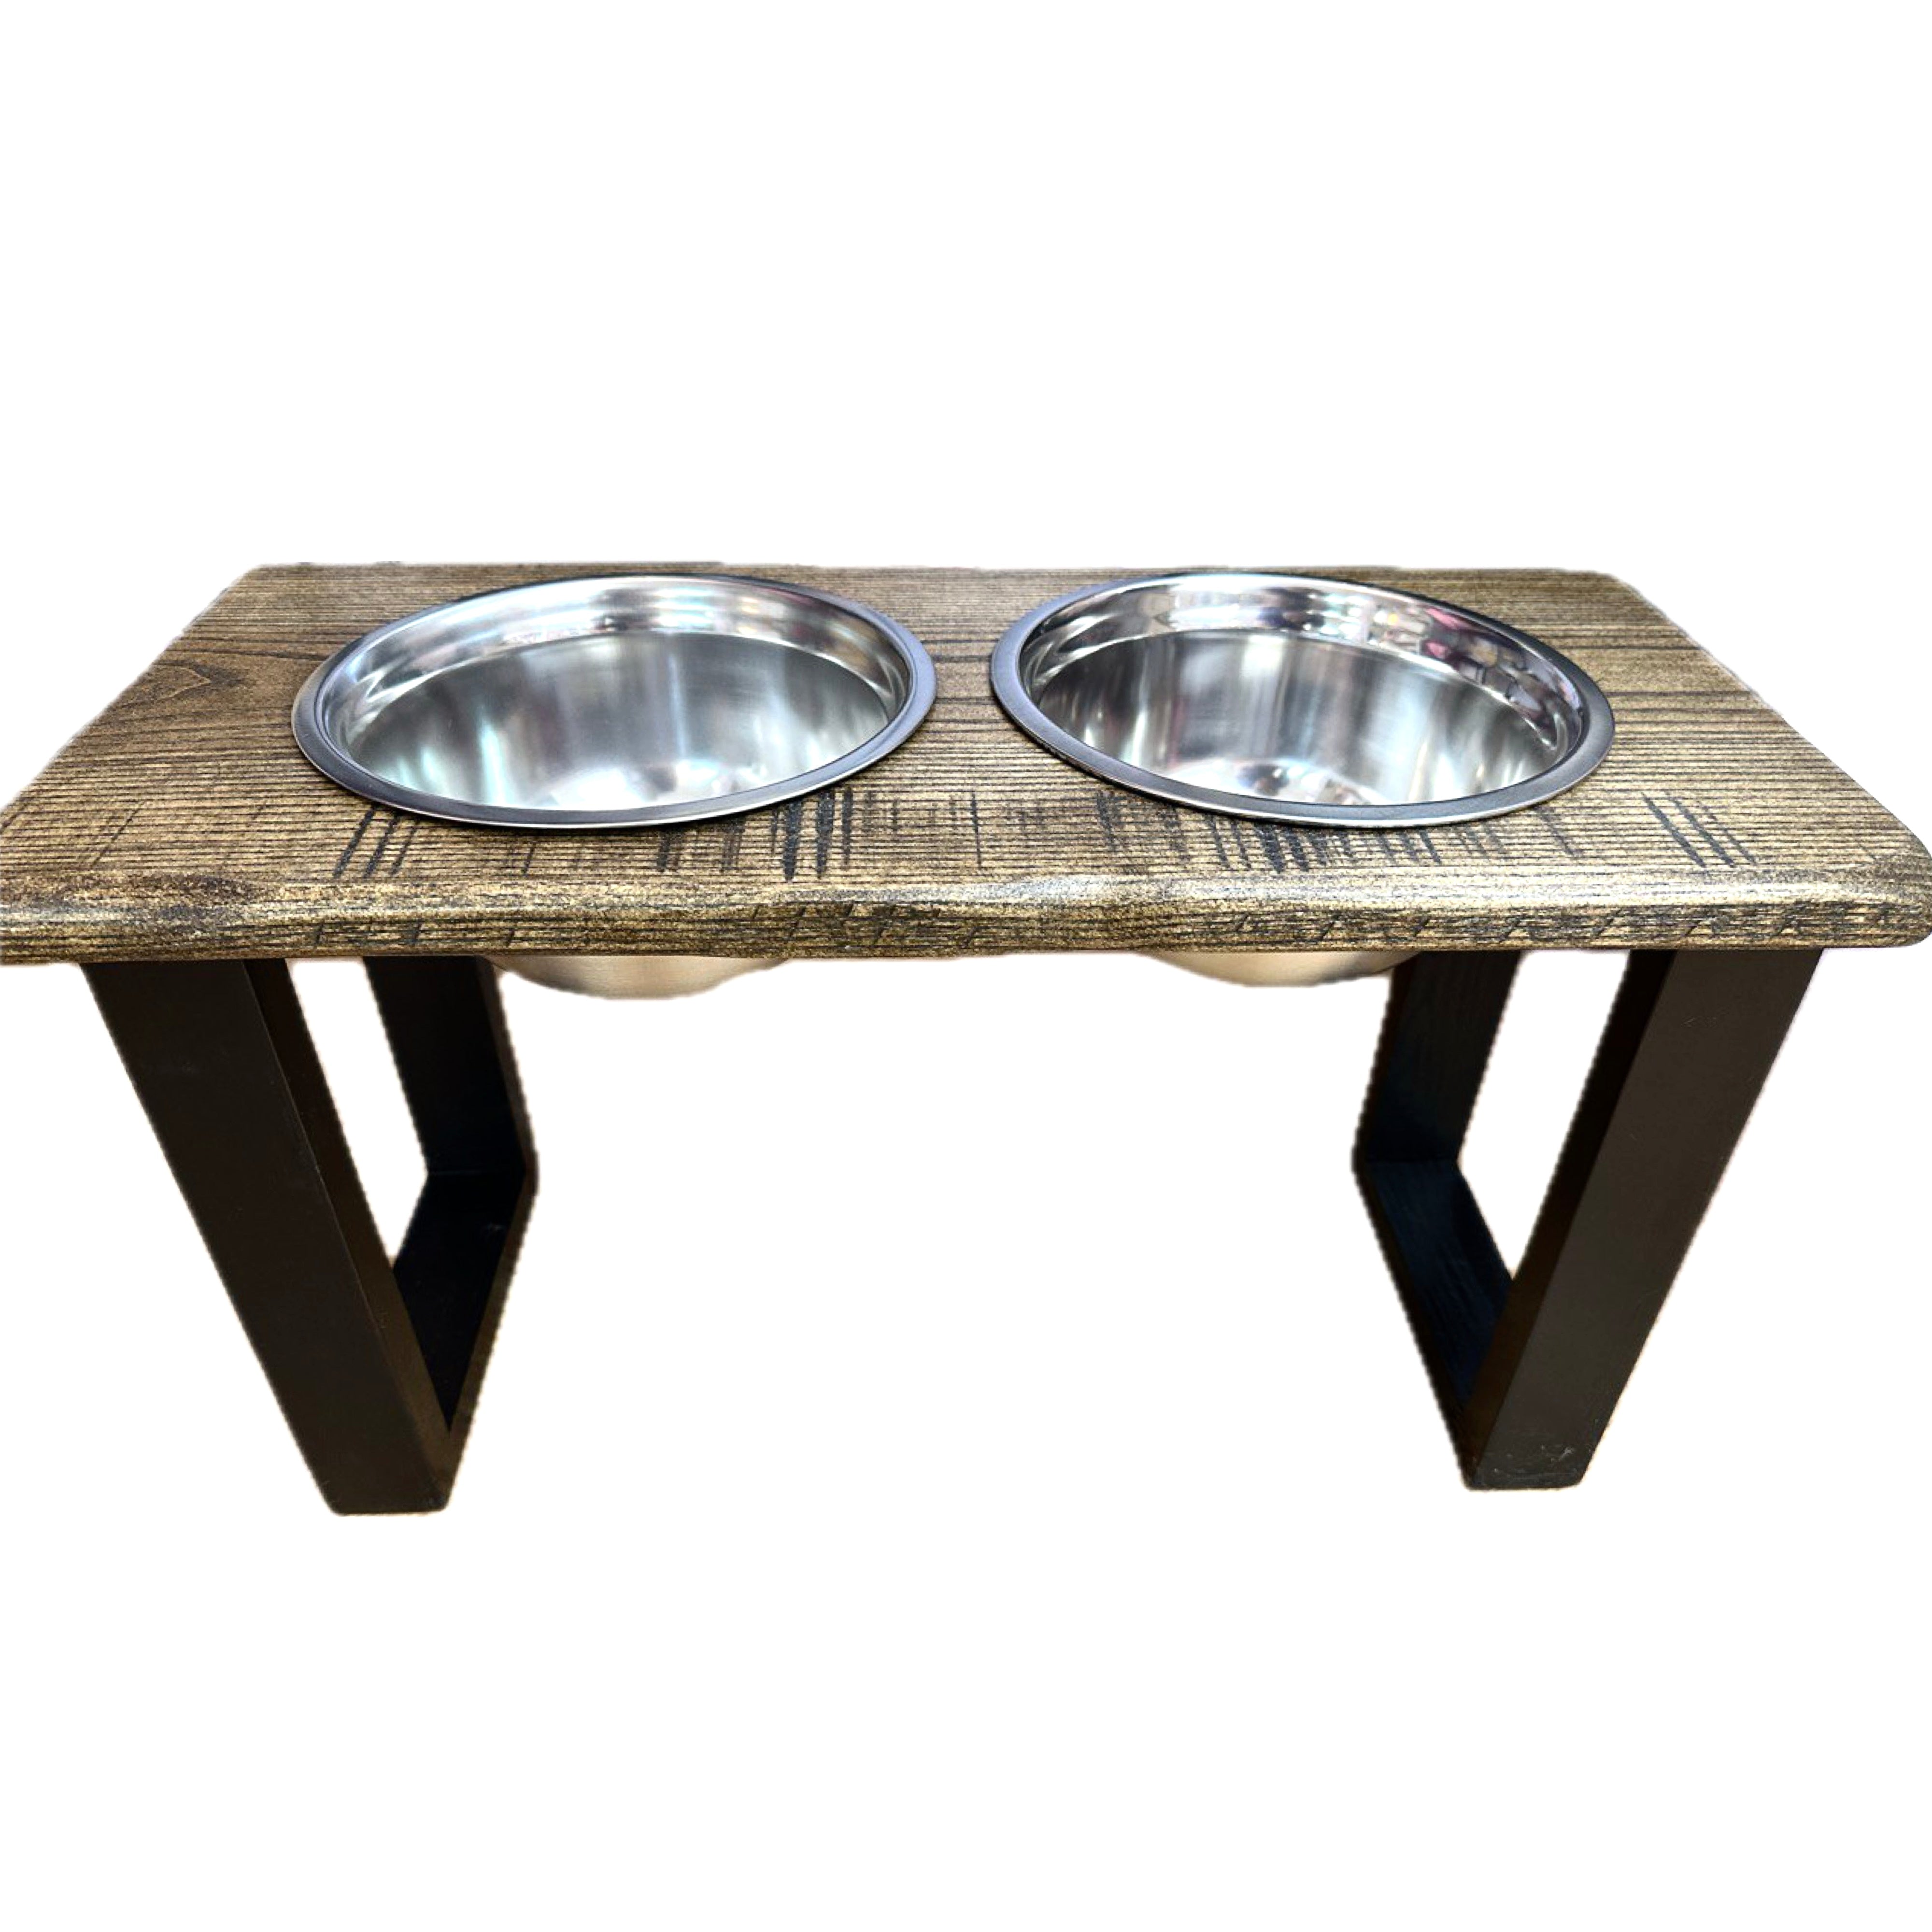 Natural Wood Double Diner For Large Dogs, With 2 3-Quart Stainless Steel Bowls, 22.5”L x 10”W x 12.5”H